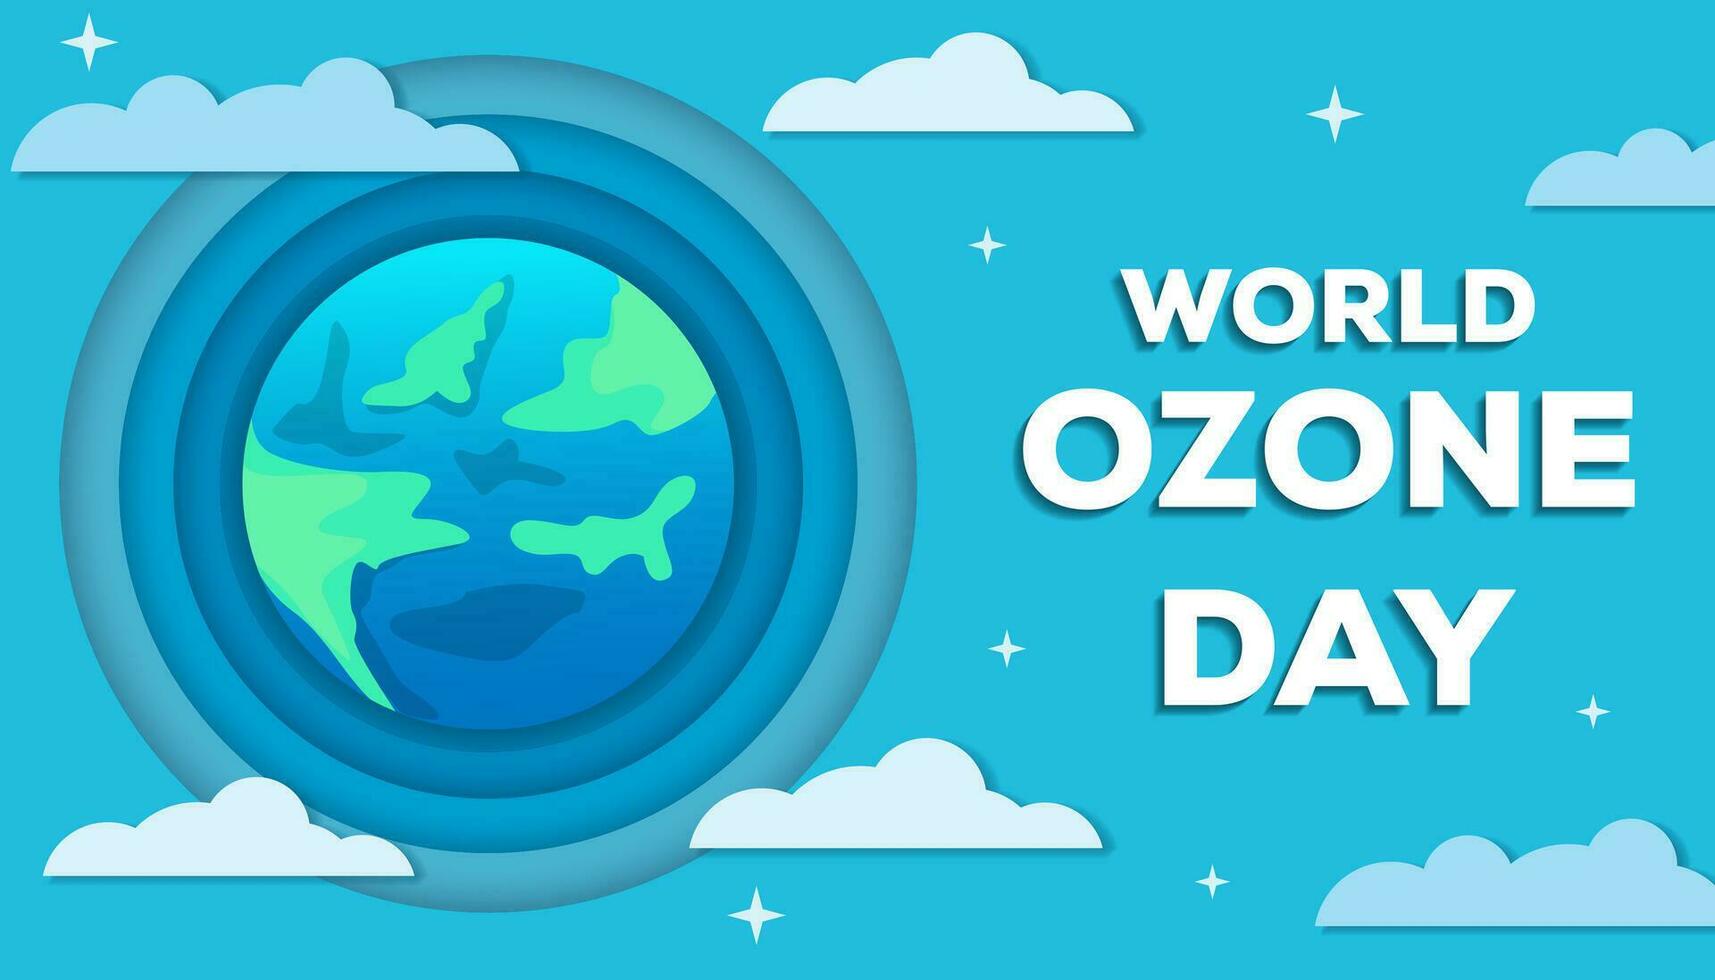 world ozone day background illustration in paper style vector